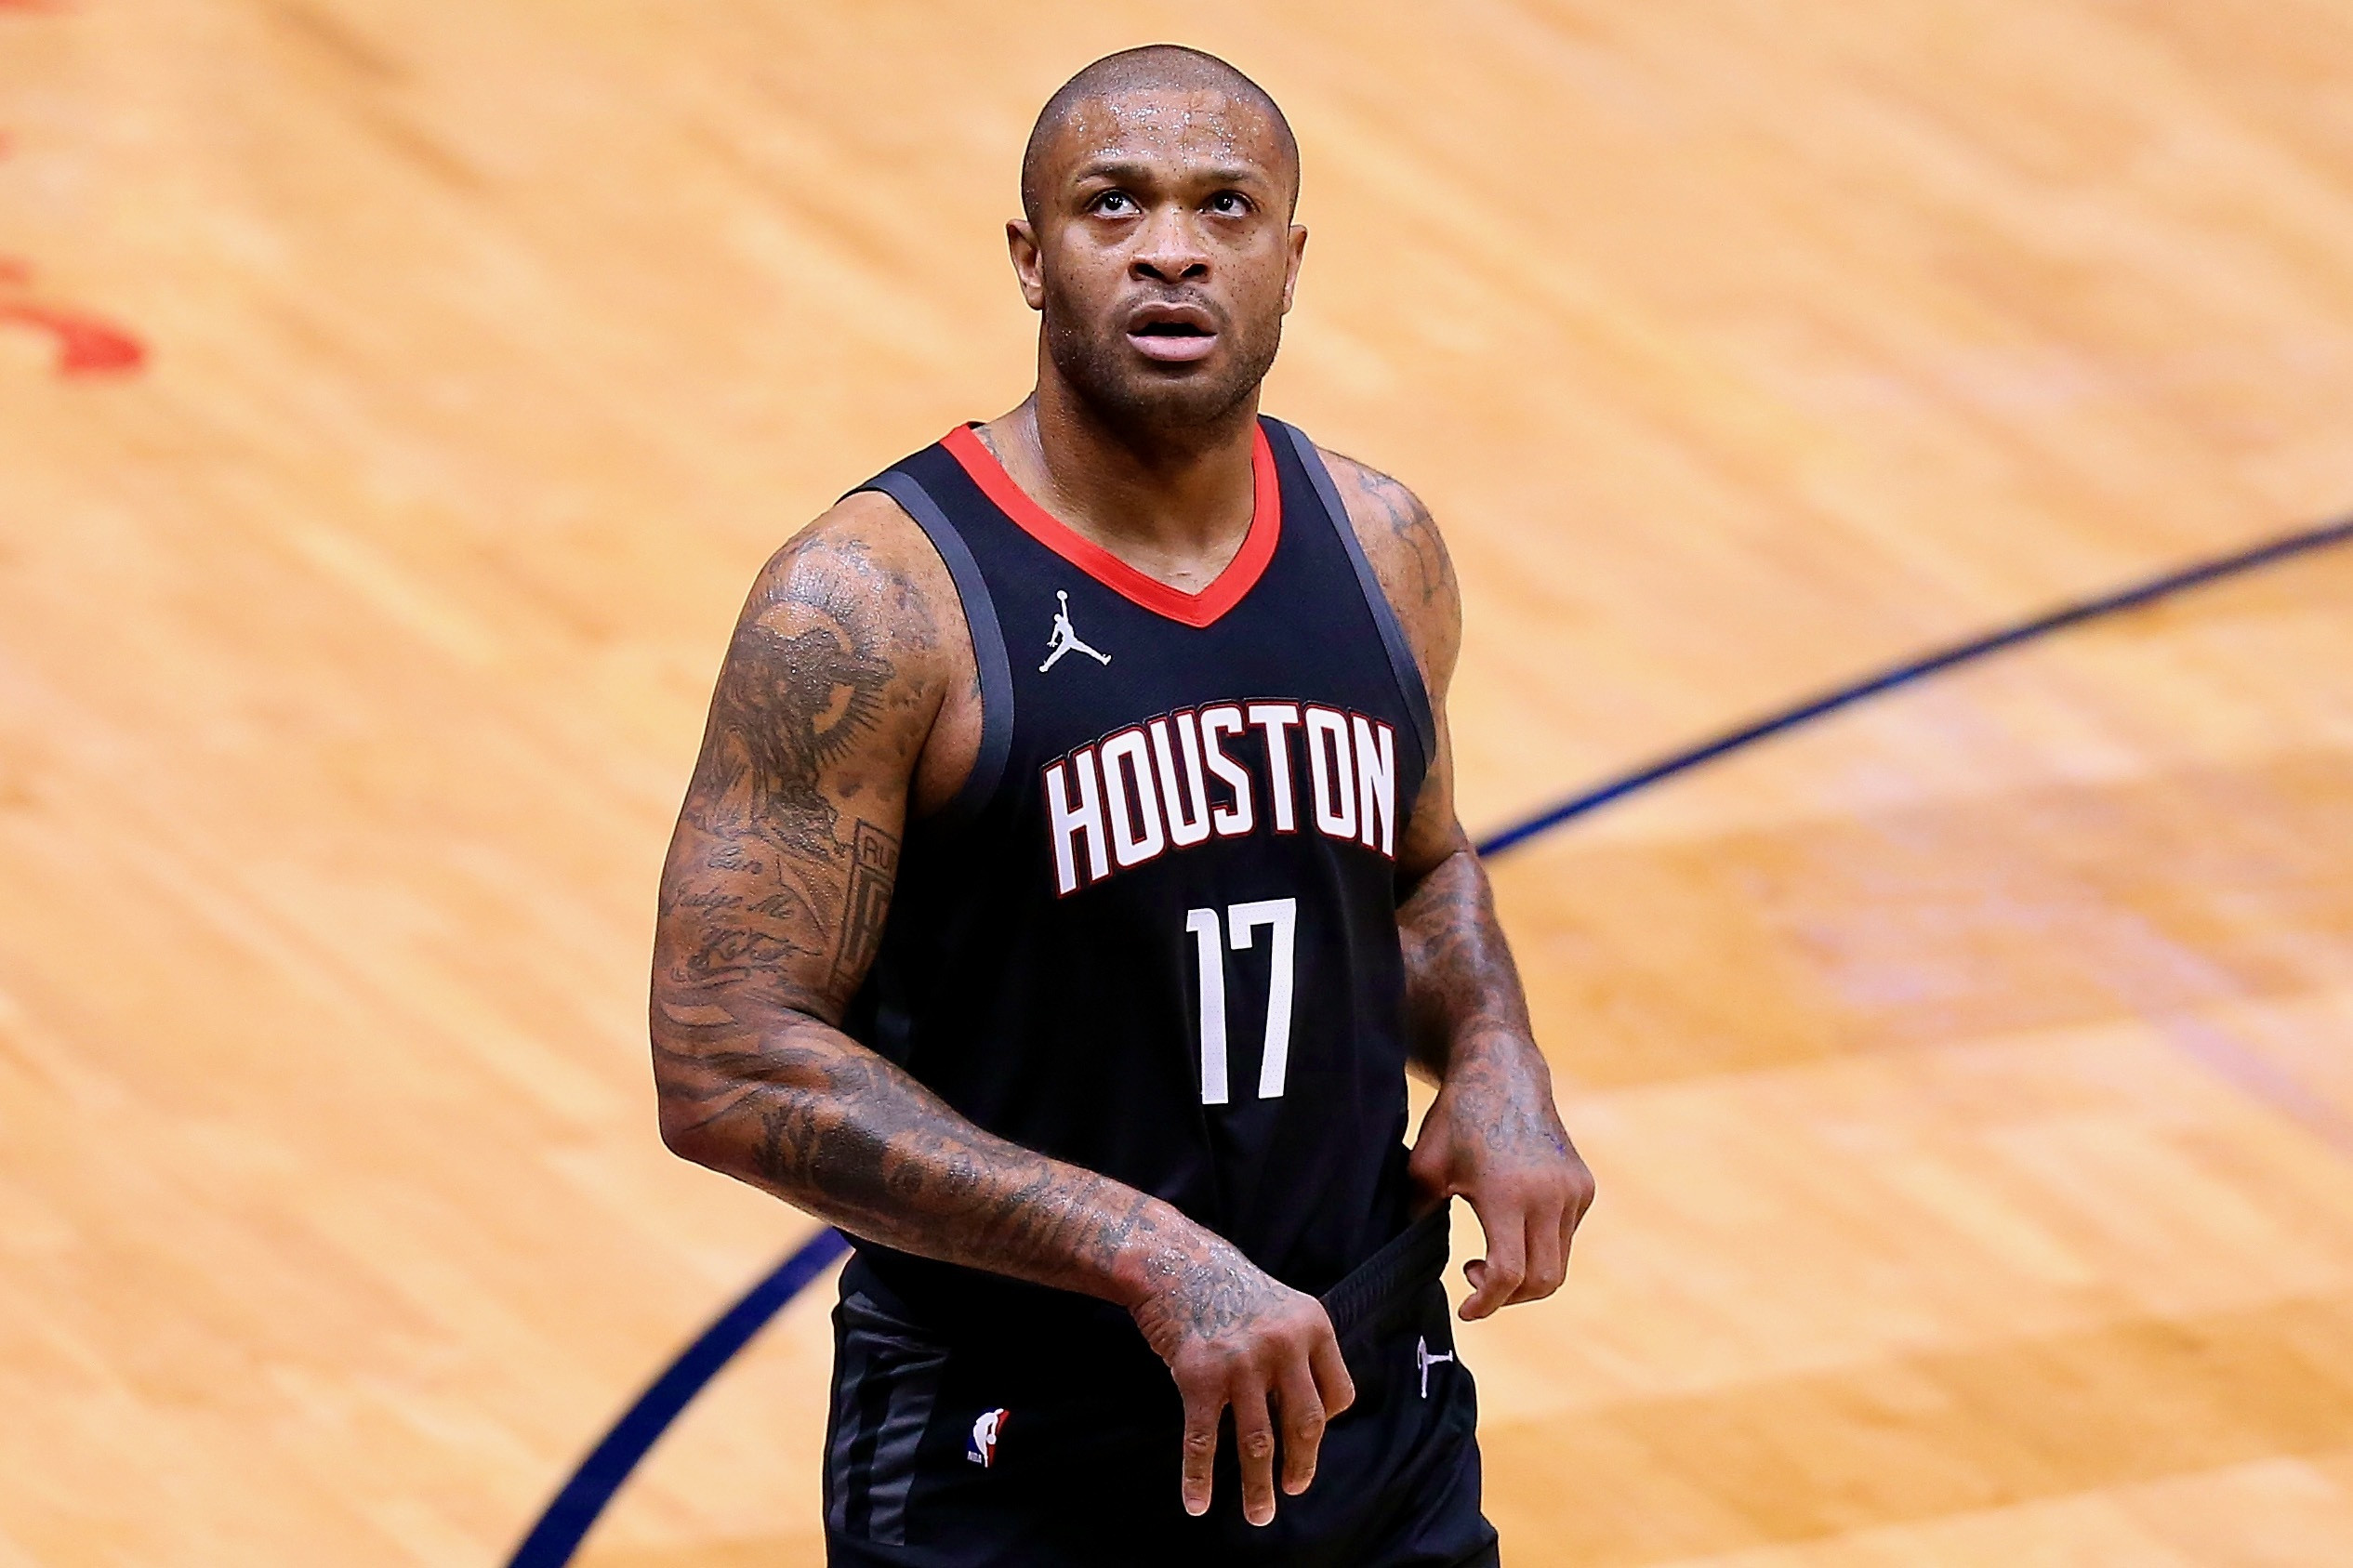 PJ Tucker's Stylist Kesha McLeod Explains The Strategy Behind Dressing Him  During The NBA Playoffs